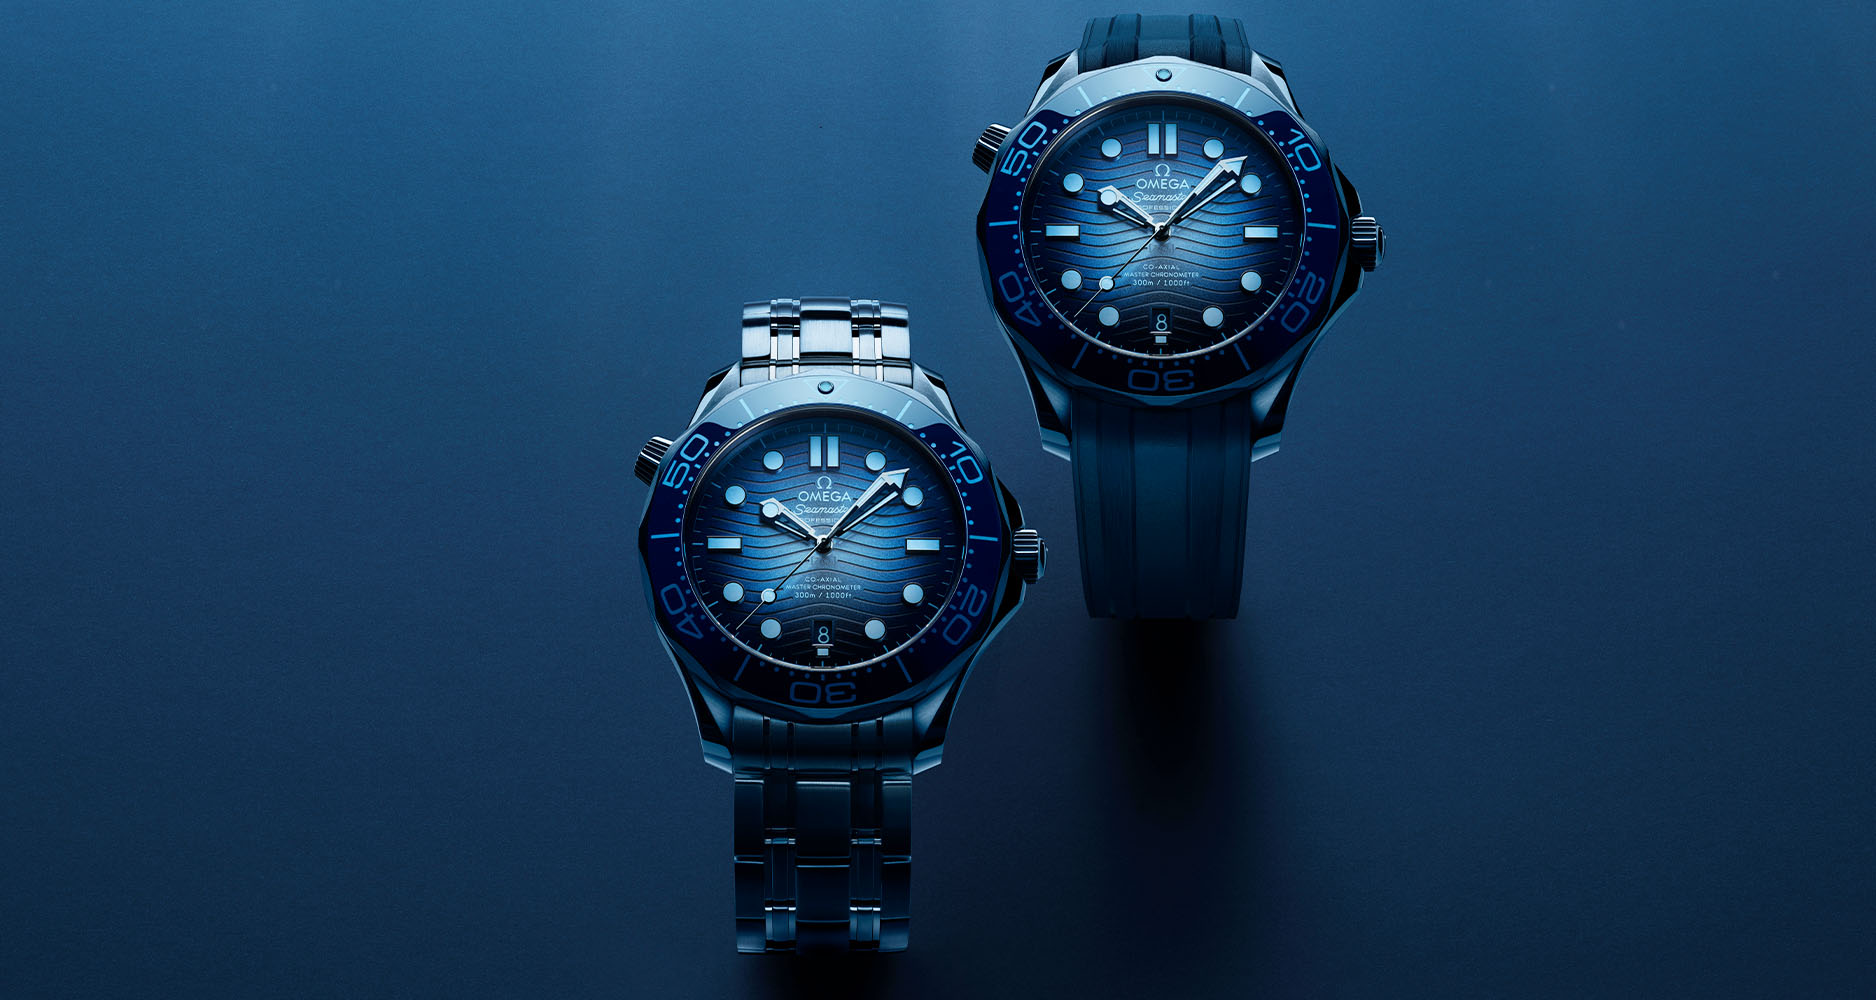 The Omega Seamaster Diver 300M with stainless steel case and bracelet, as well as rubber strap.